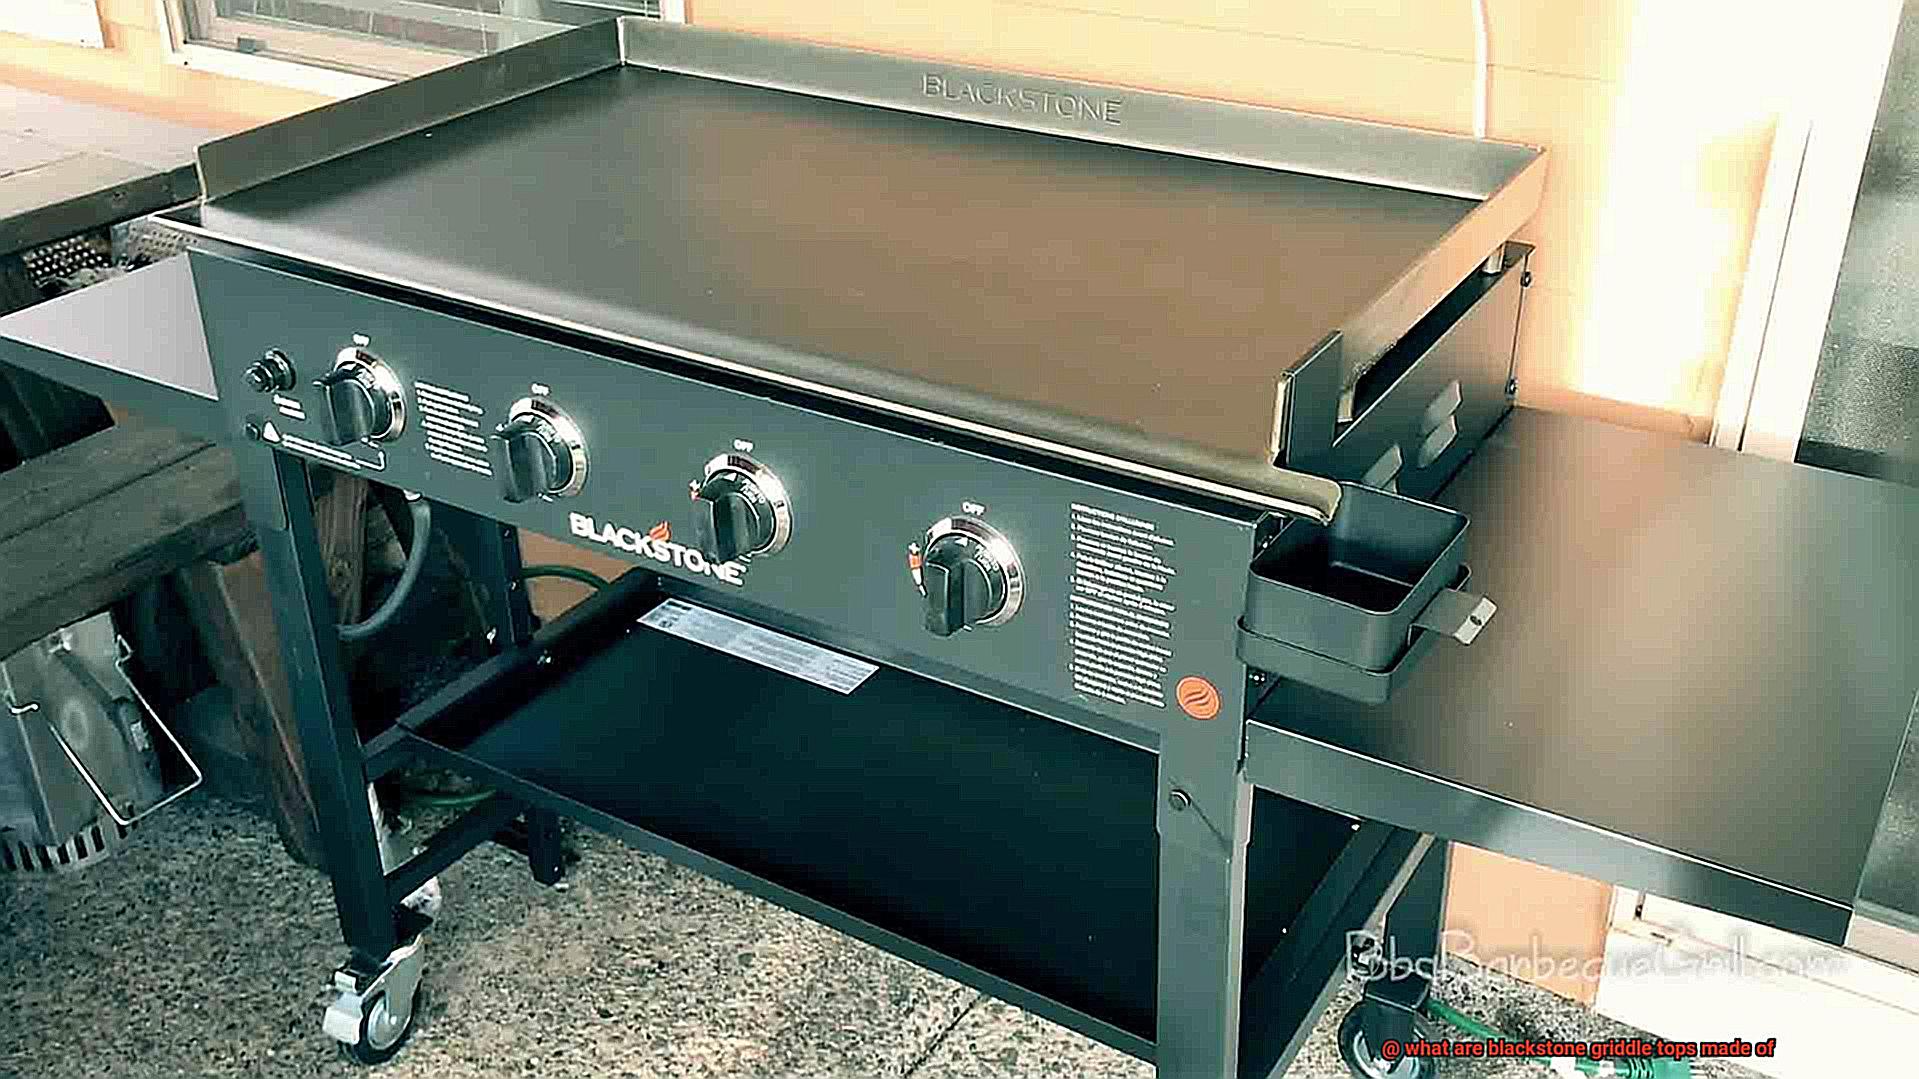 what are blackstone griddle tops made of? - Pastime Bar And Grill